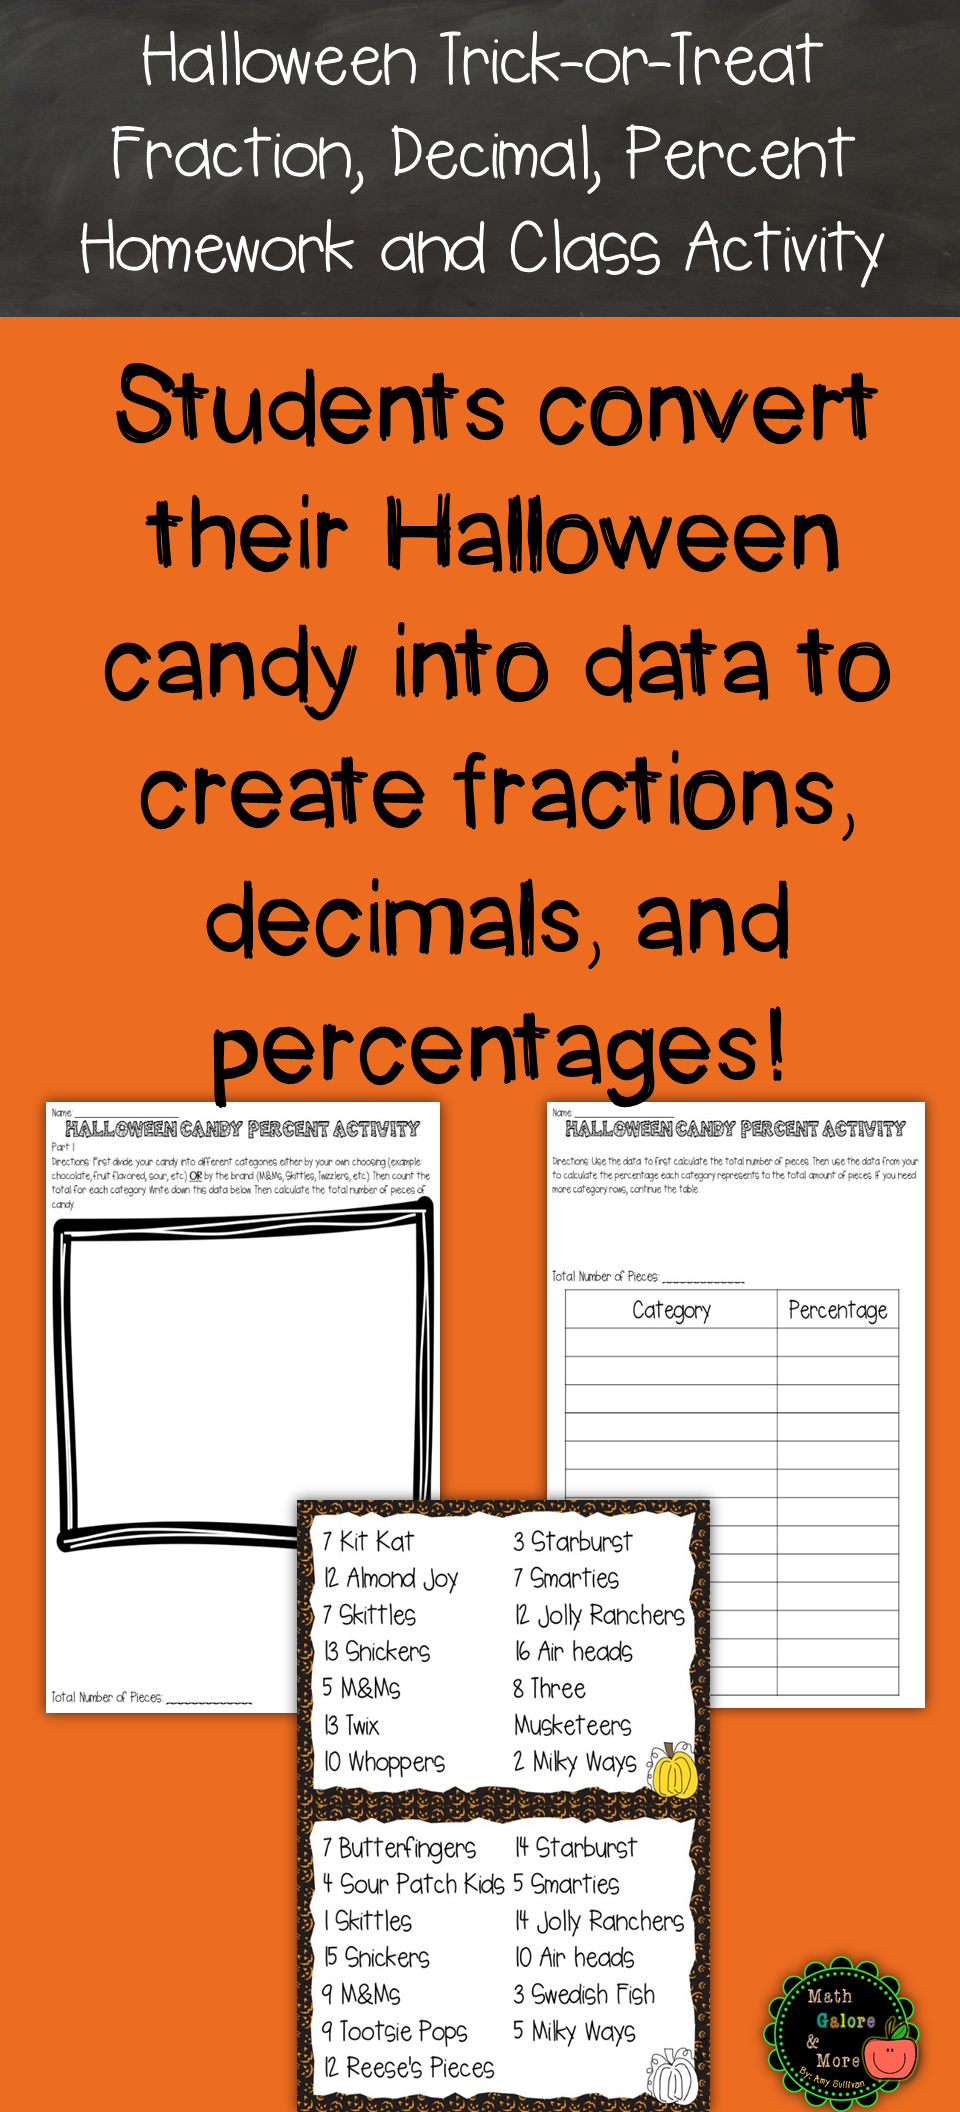 This Activity Can Be Used With The Data Students Collect